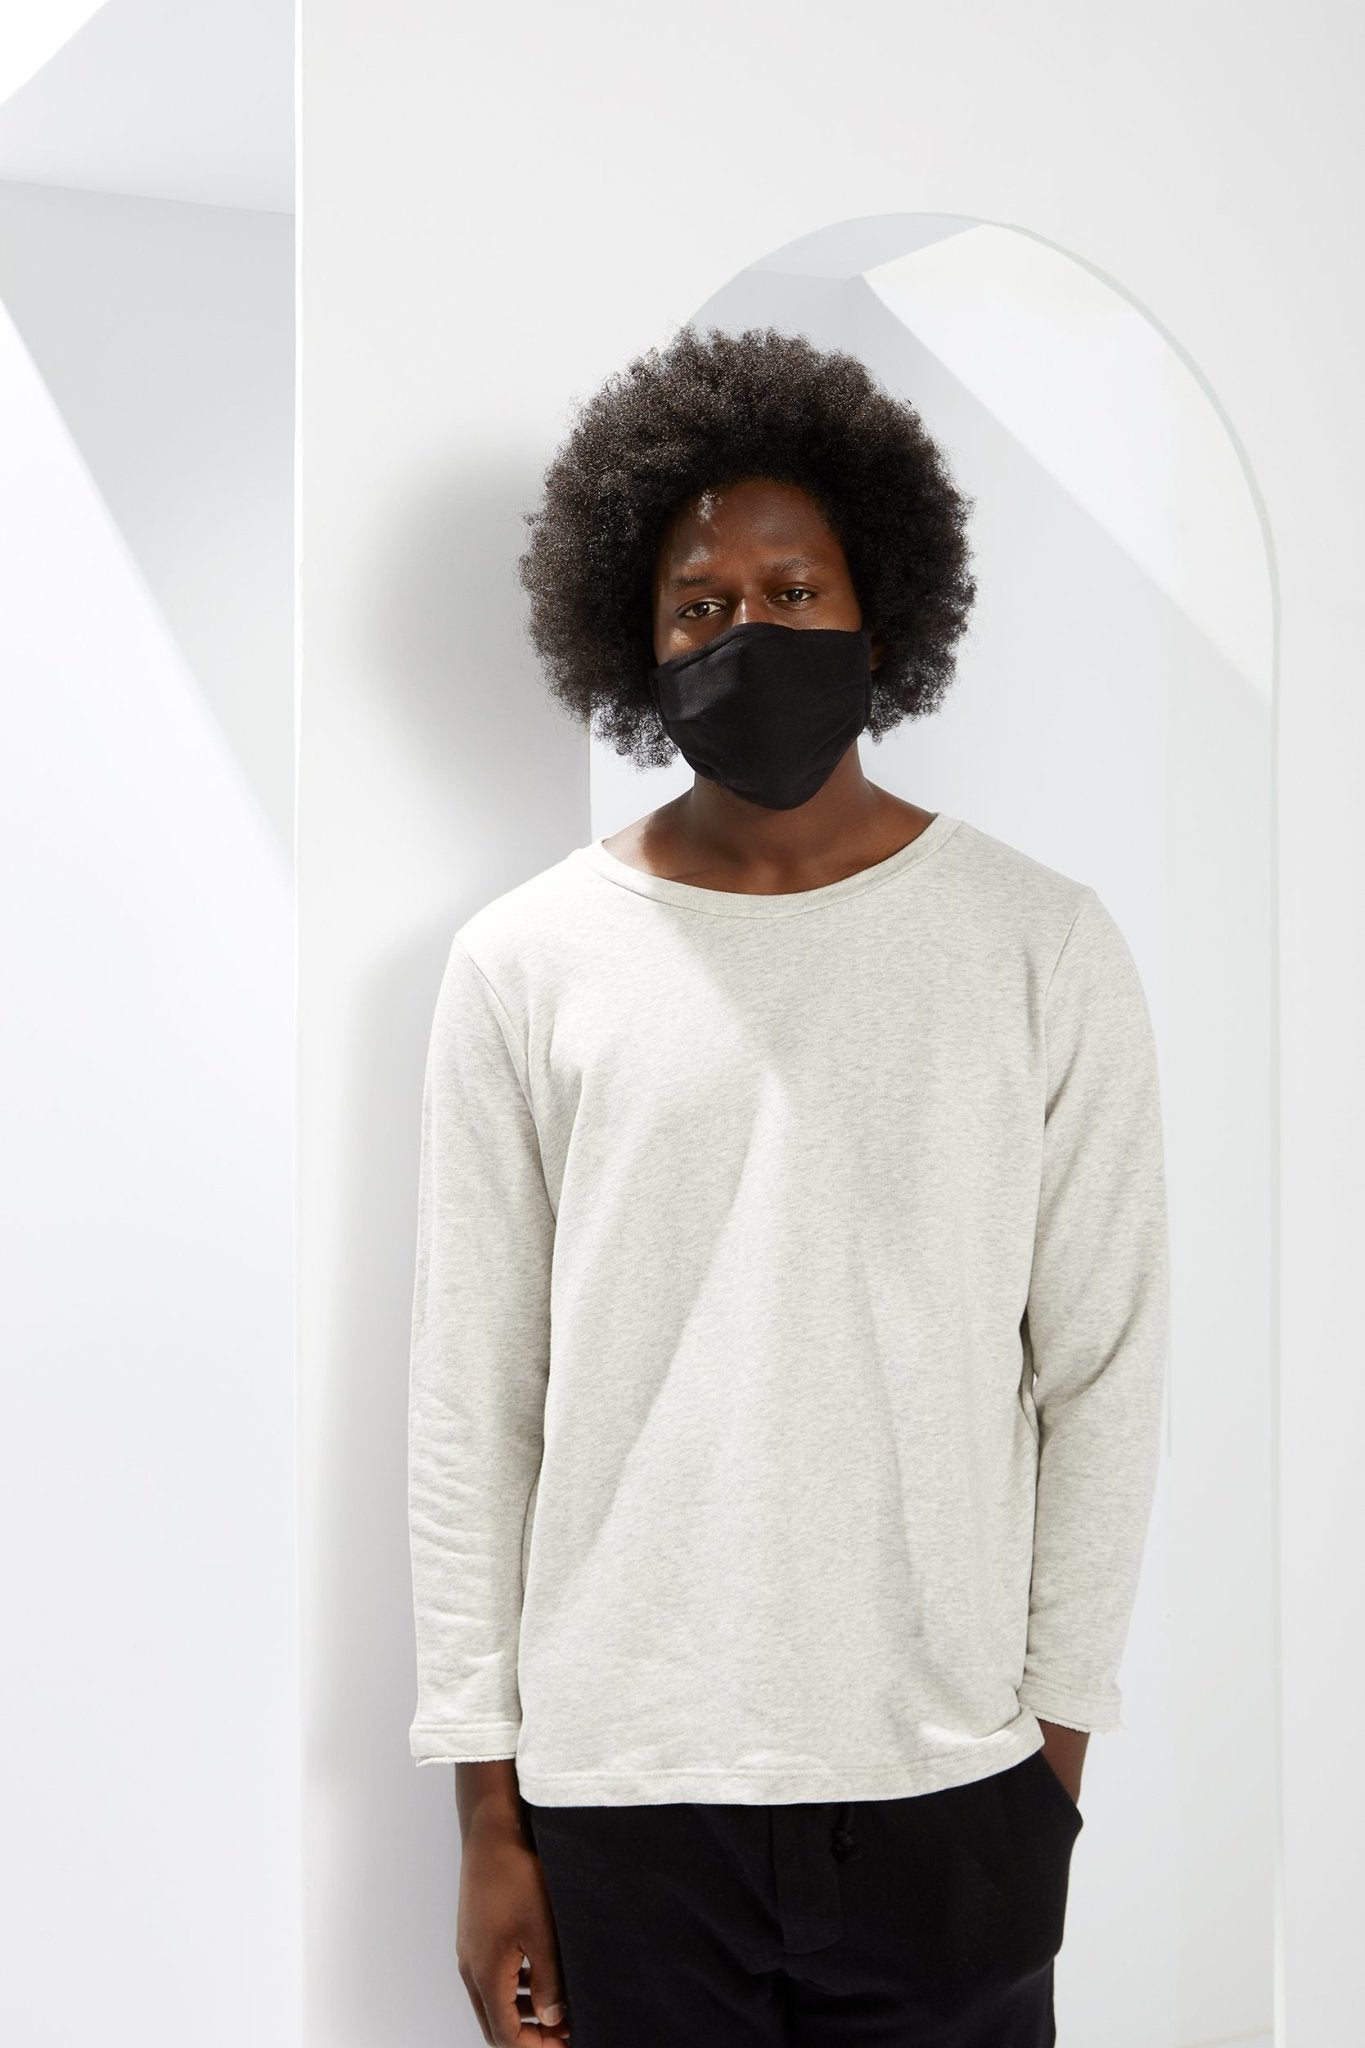 A.BCH A.00 Black Dust Mask in Organic Cotton